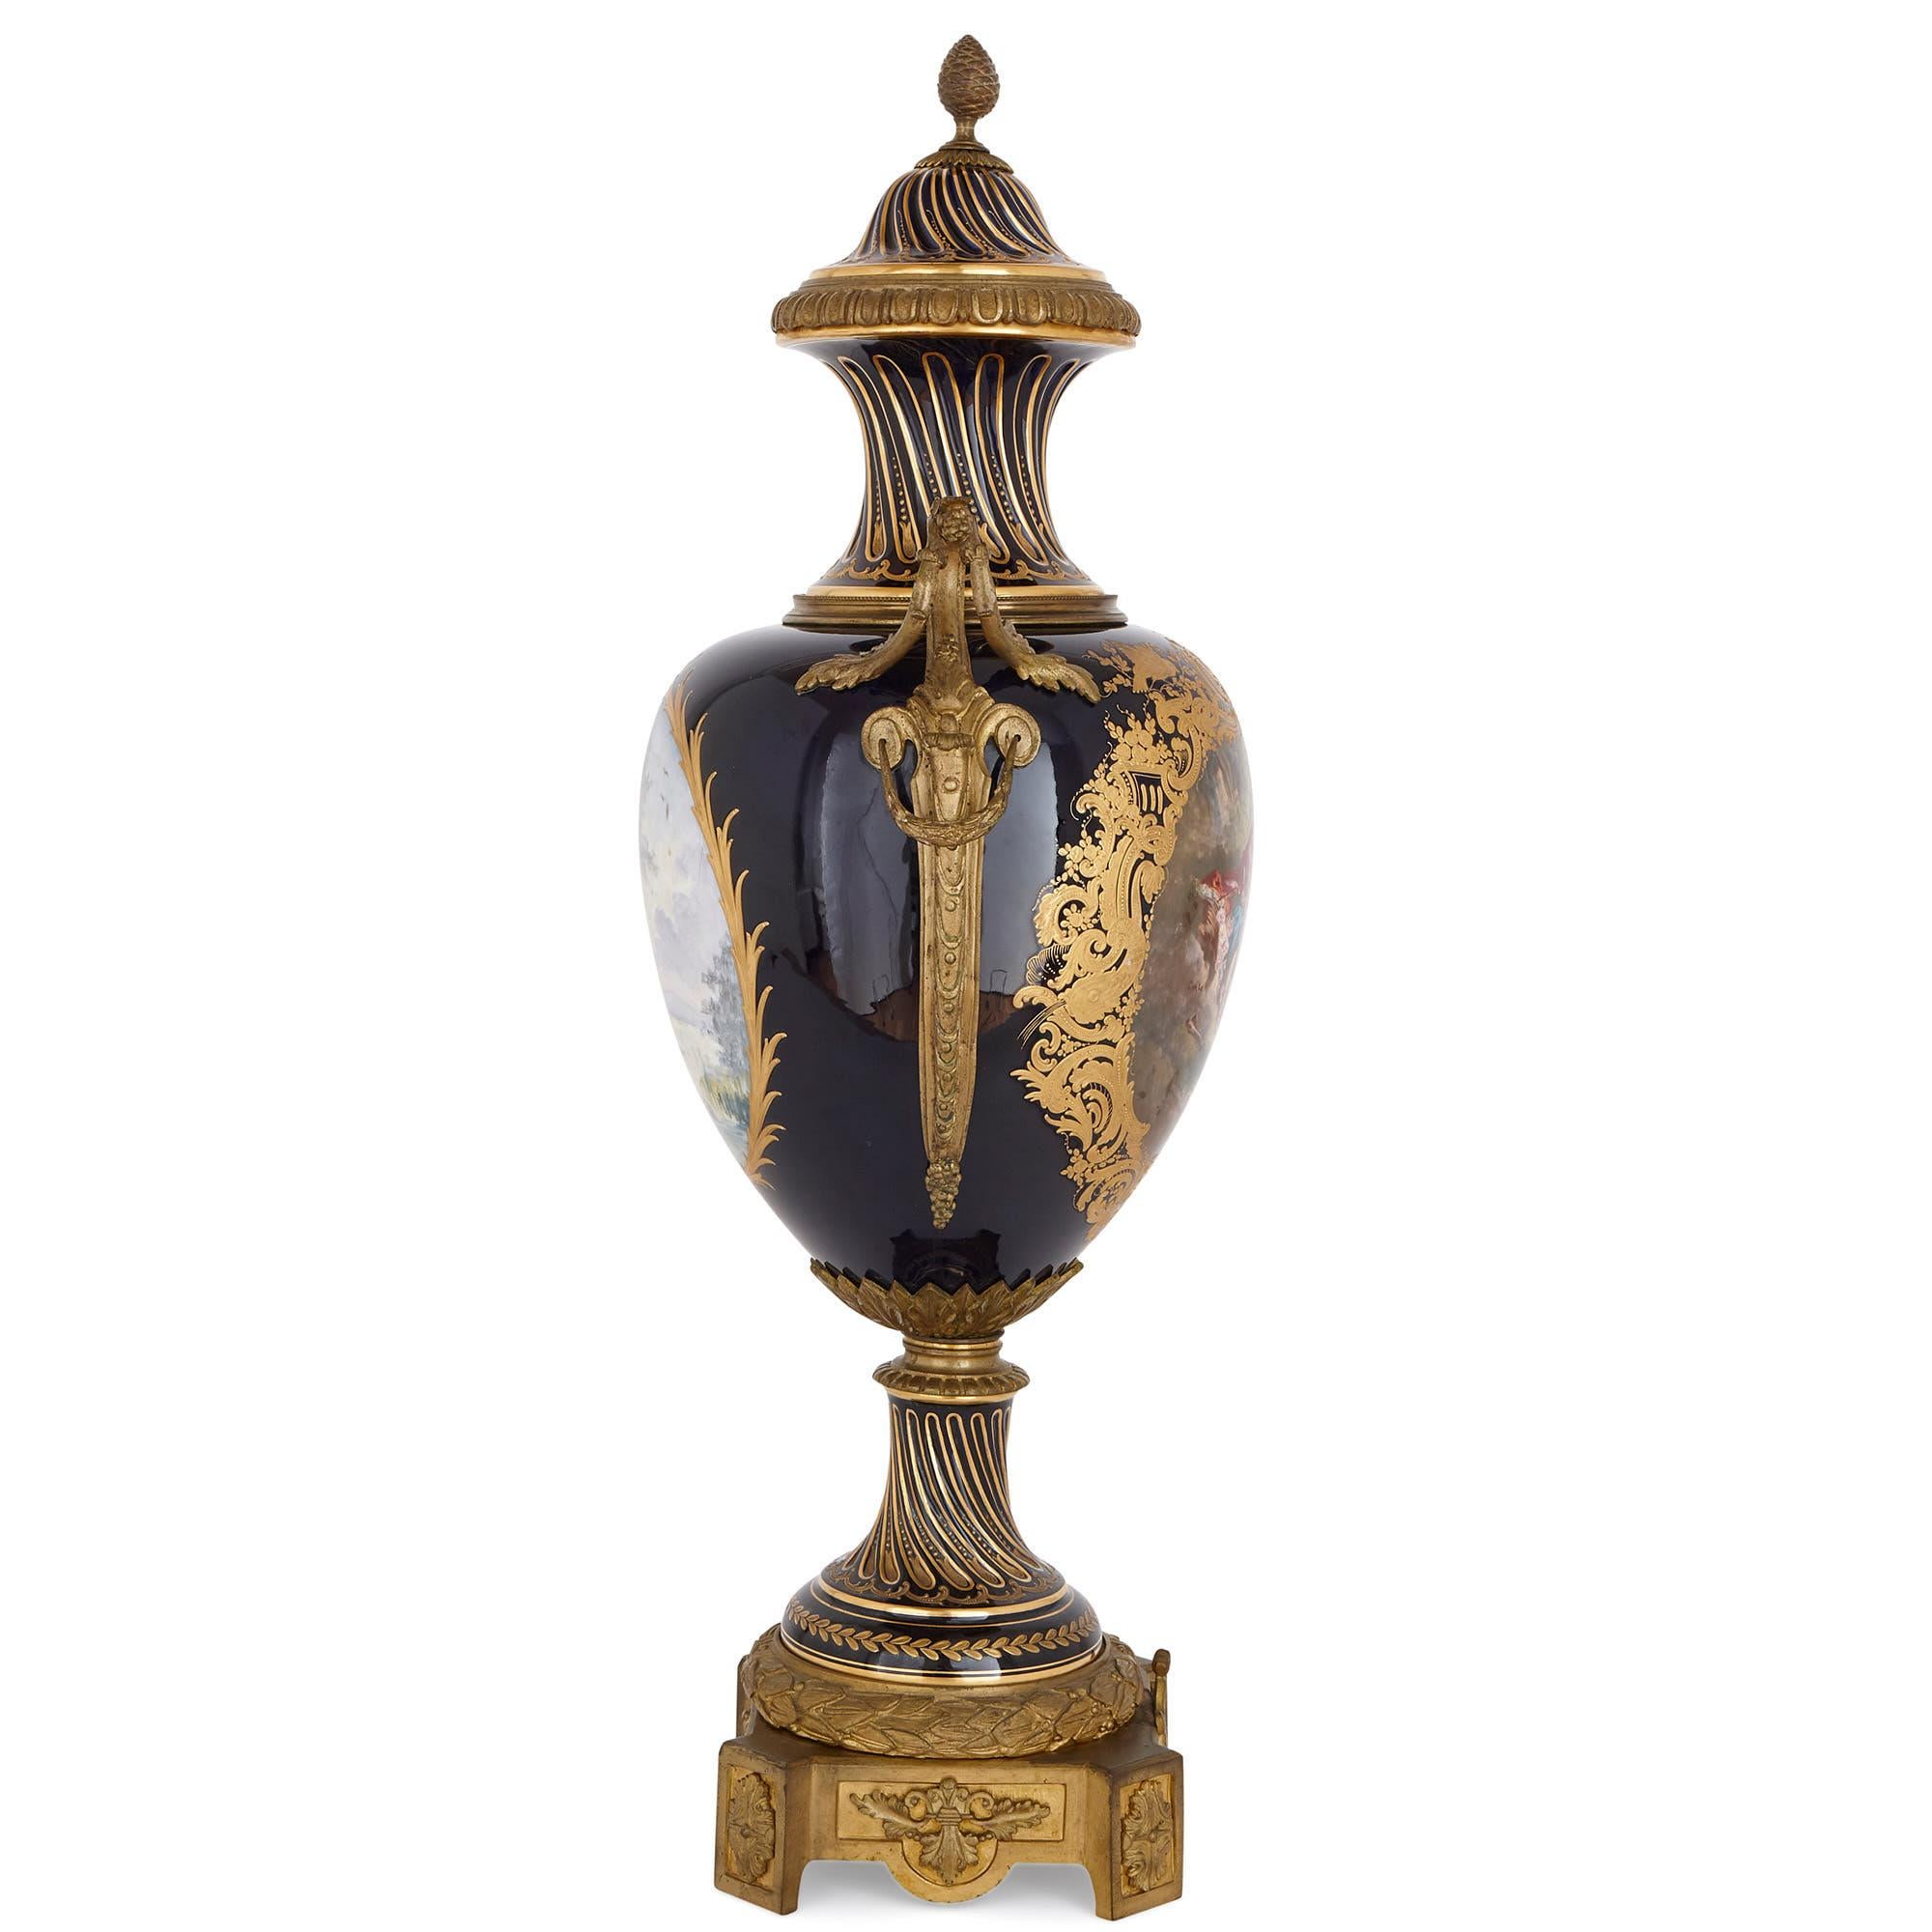 These Sèvres style vases are exceptional works of decorative art, which have been finely painted, gilded and adorned with gilt bronze (ormolu) mounts. The vases are designed in an elegant Rococo style, which was typical of porcelain created by the